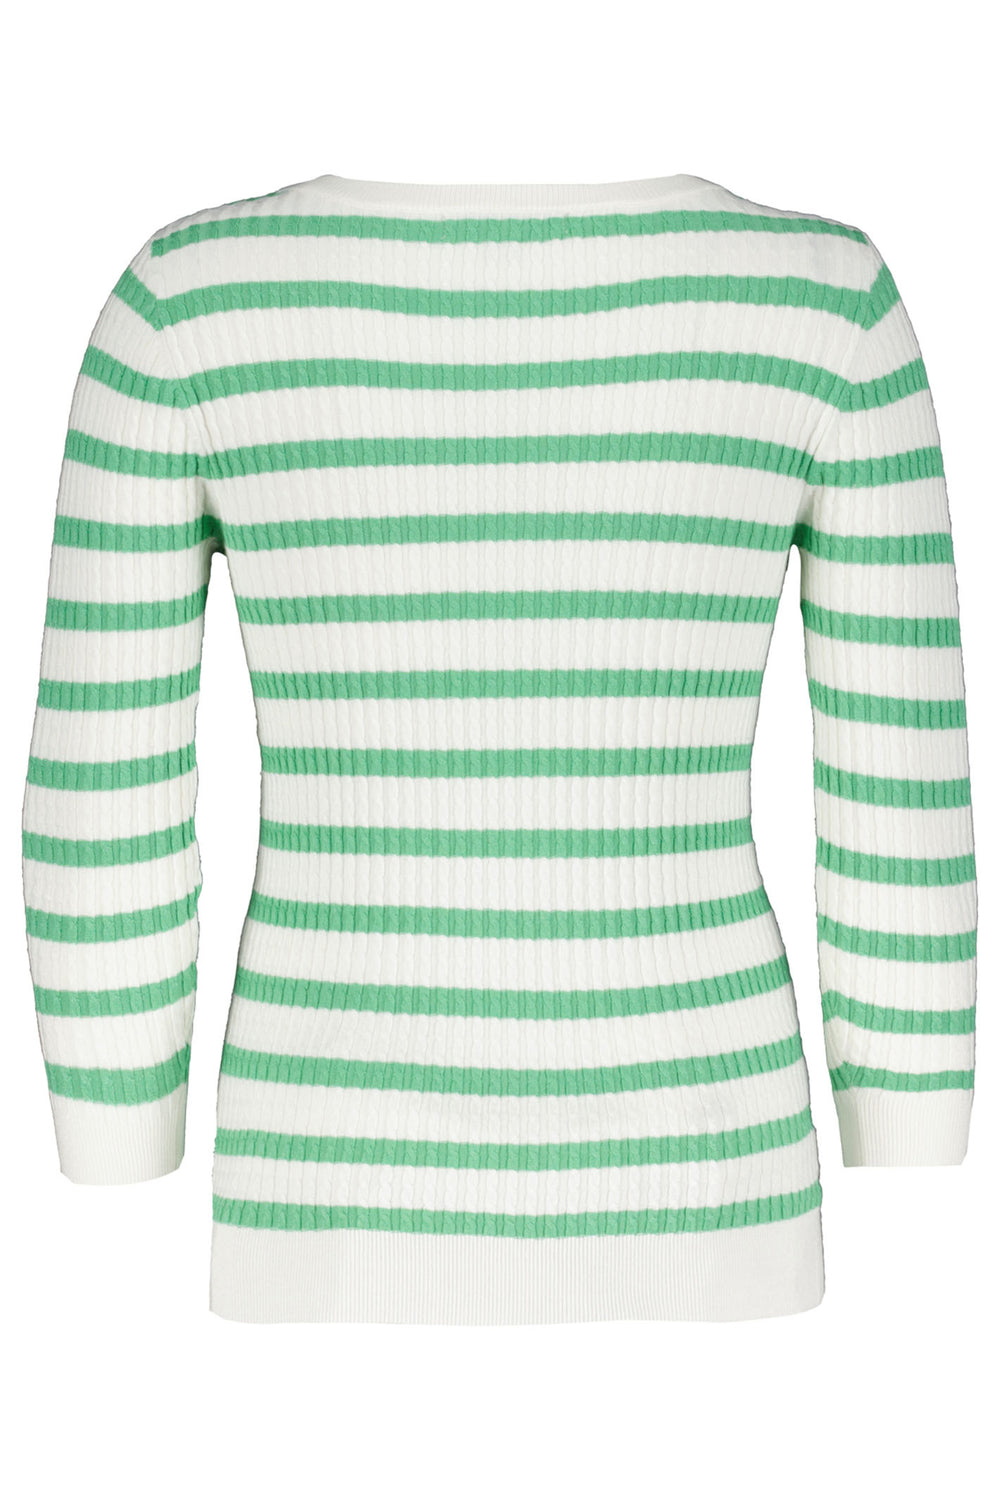 Red Button SRB4195 Summer Green Stripe Long Sleeve Cable Knit Top - Dotique